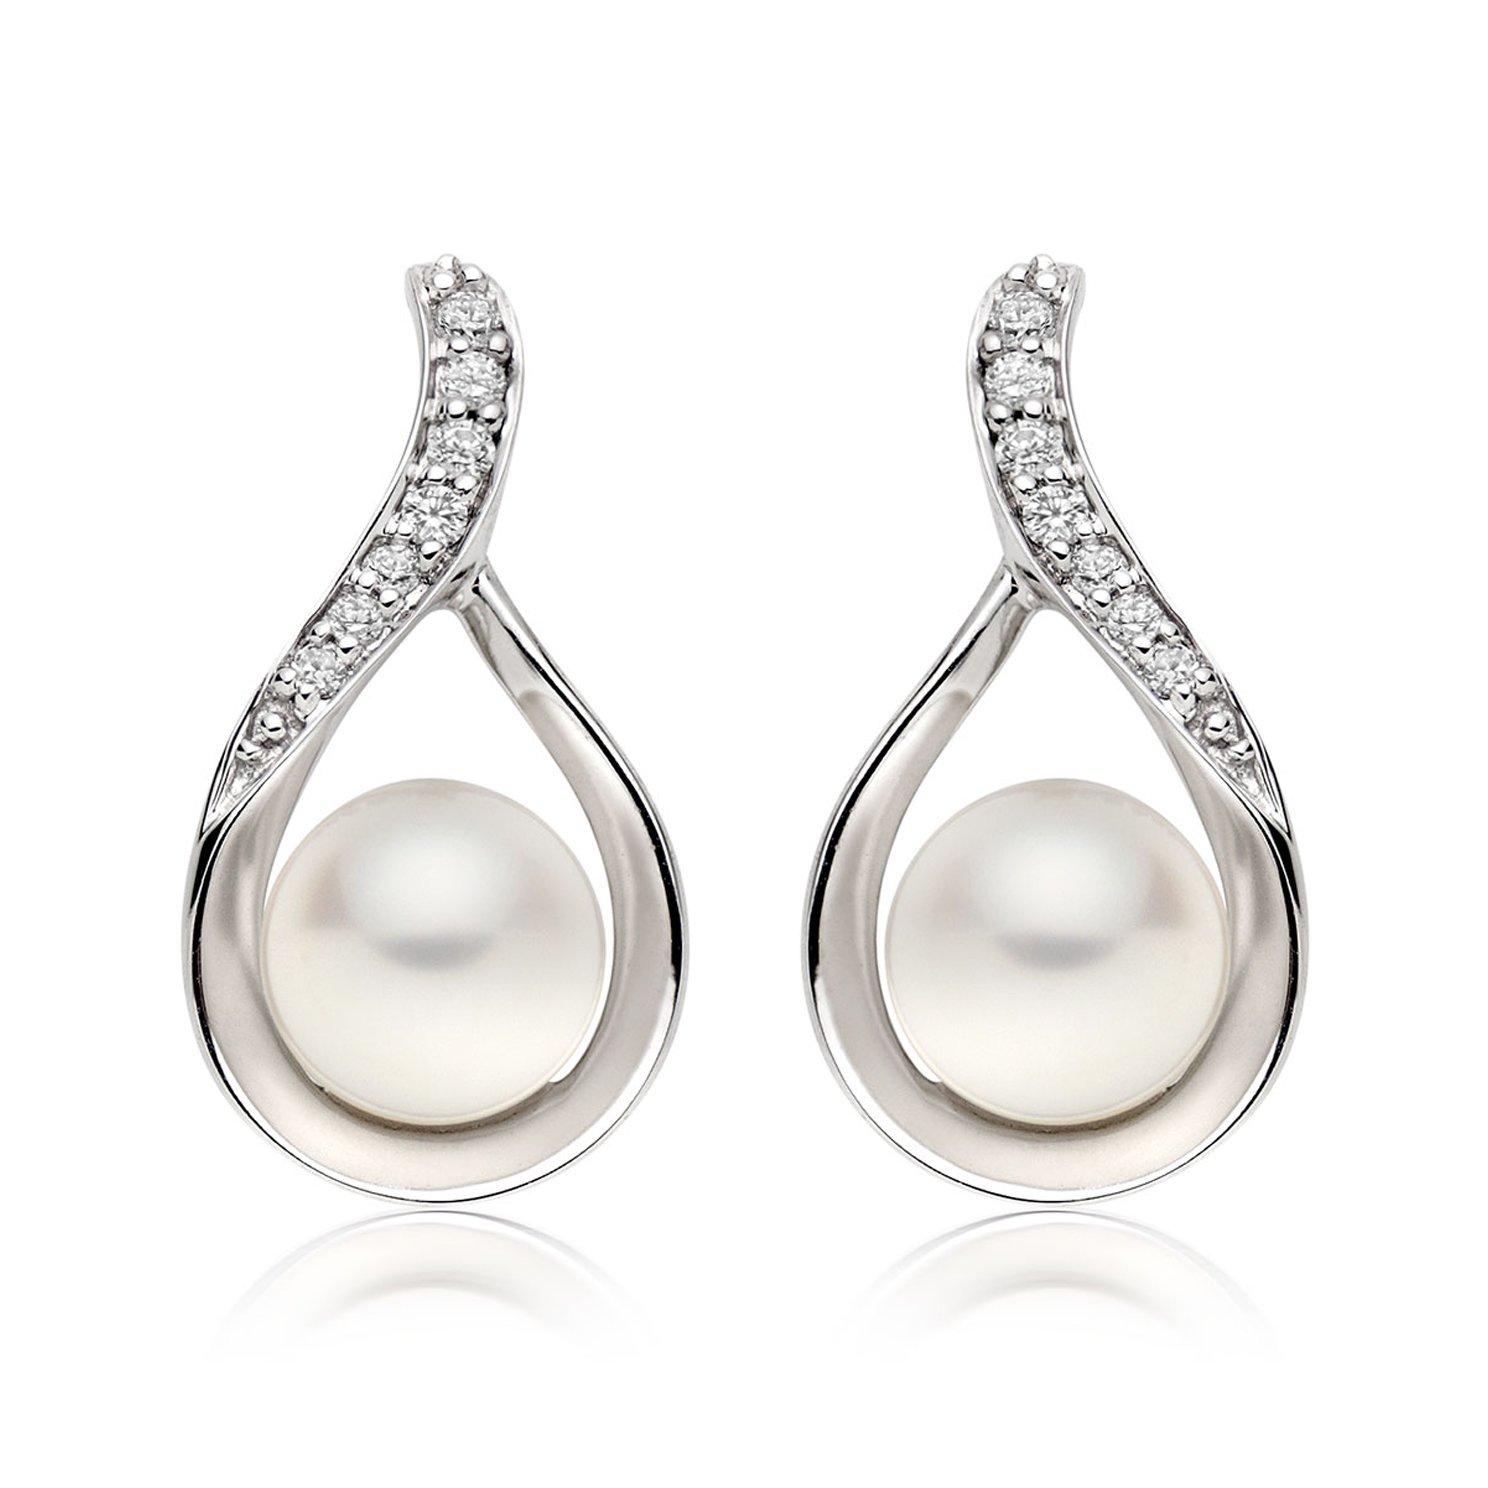 9ct White Gold Diamond Freshwater Cultured Pearl Earrings | 0000581 ...